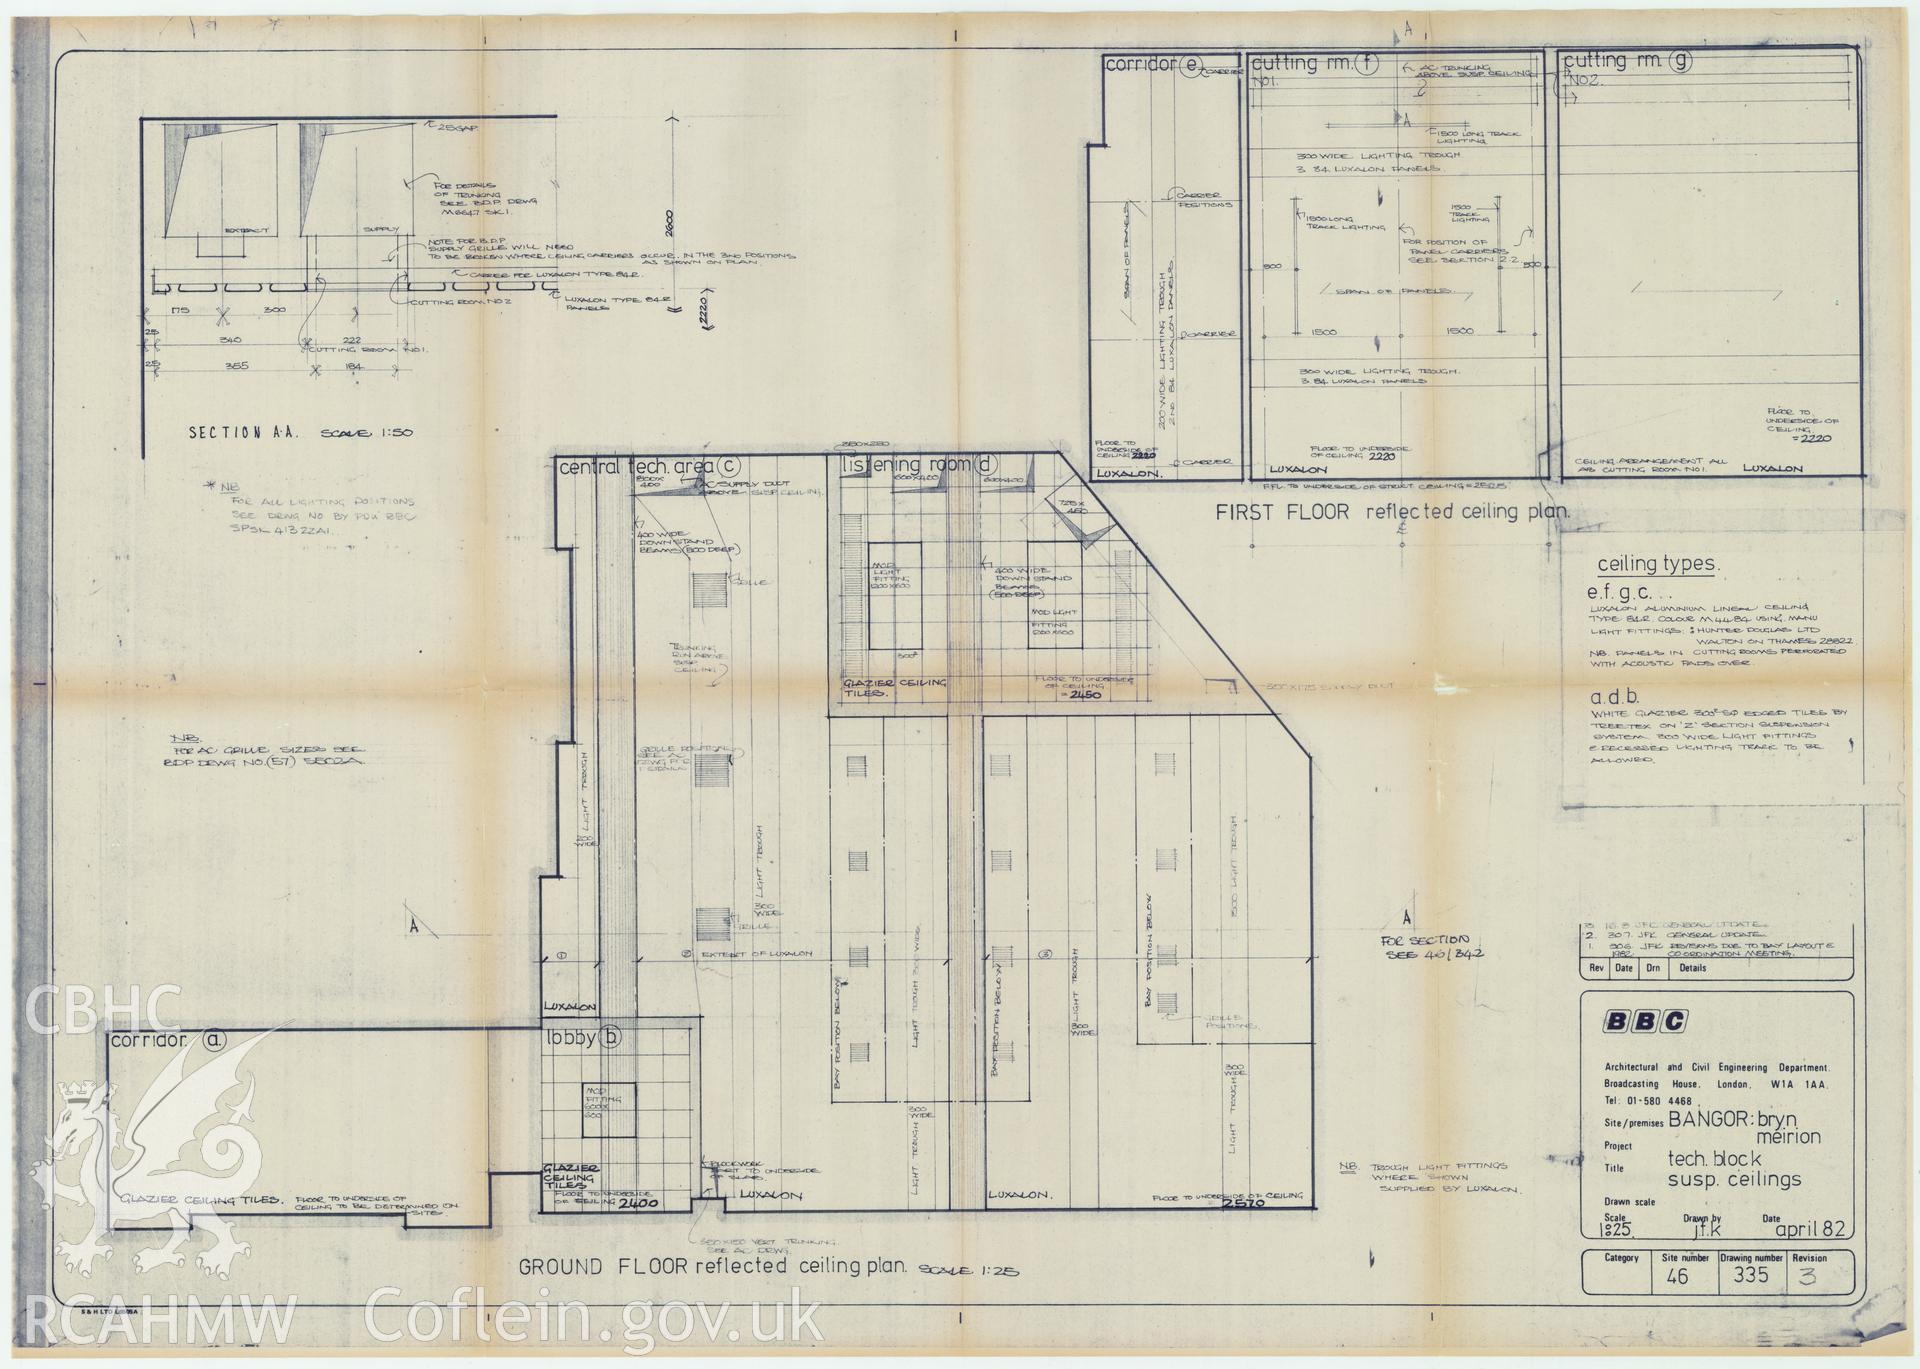 BBC premises, Bryn Meirion, Bangor - plan of the suspended ceiling of the Technology Block. Drawing No. 46/335 Rev3, April 1982.